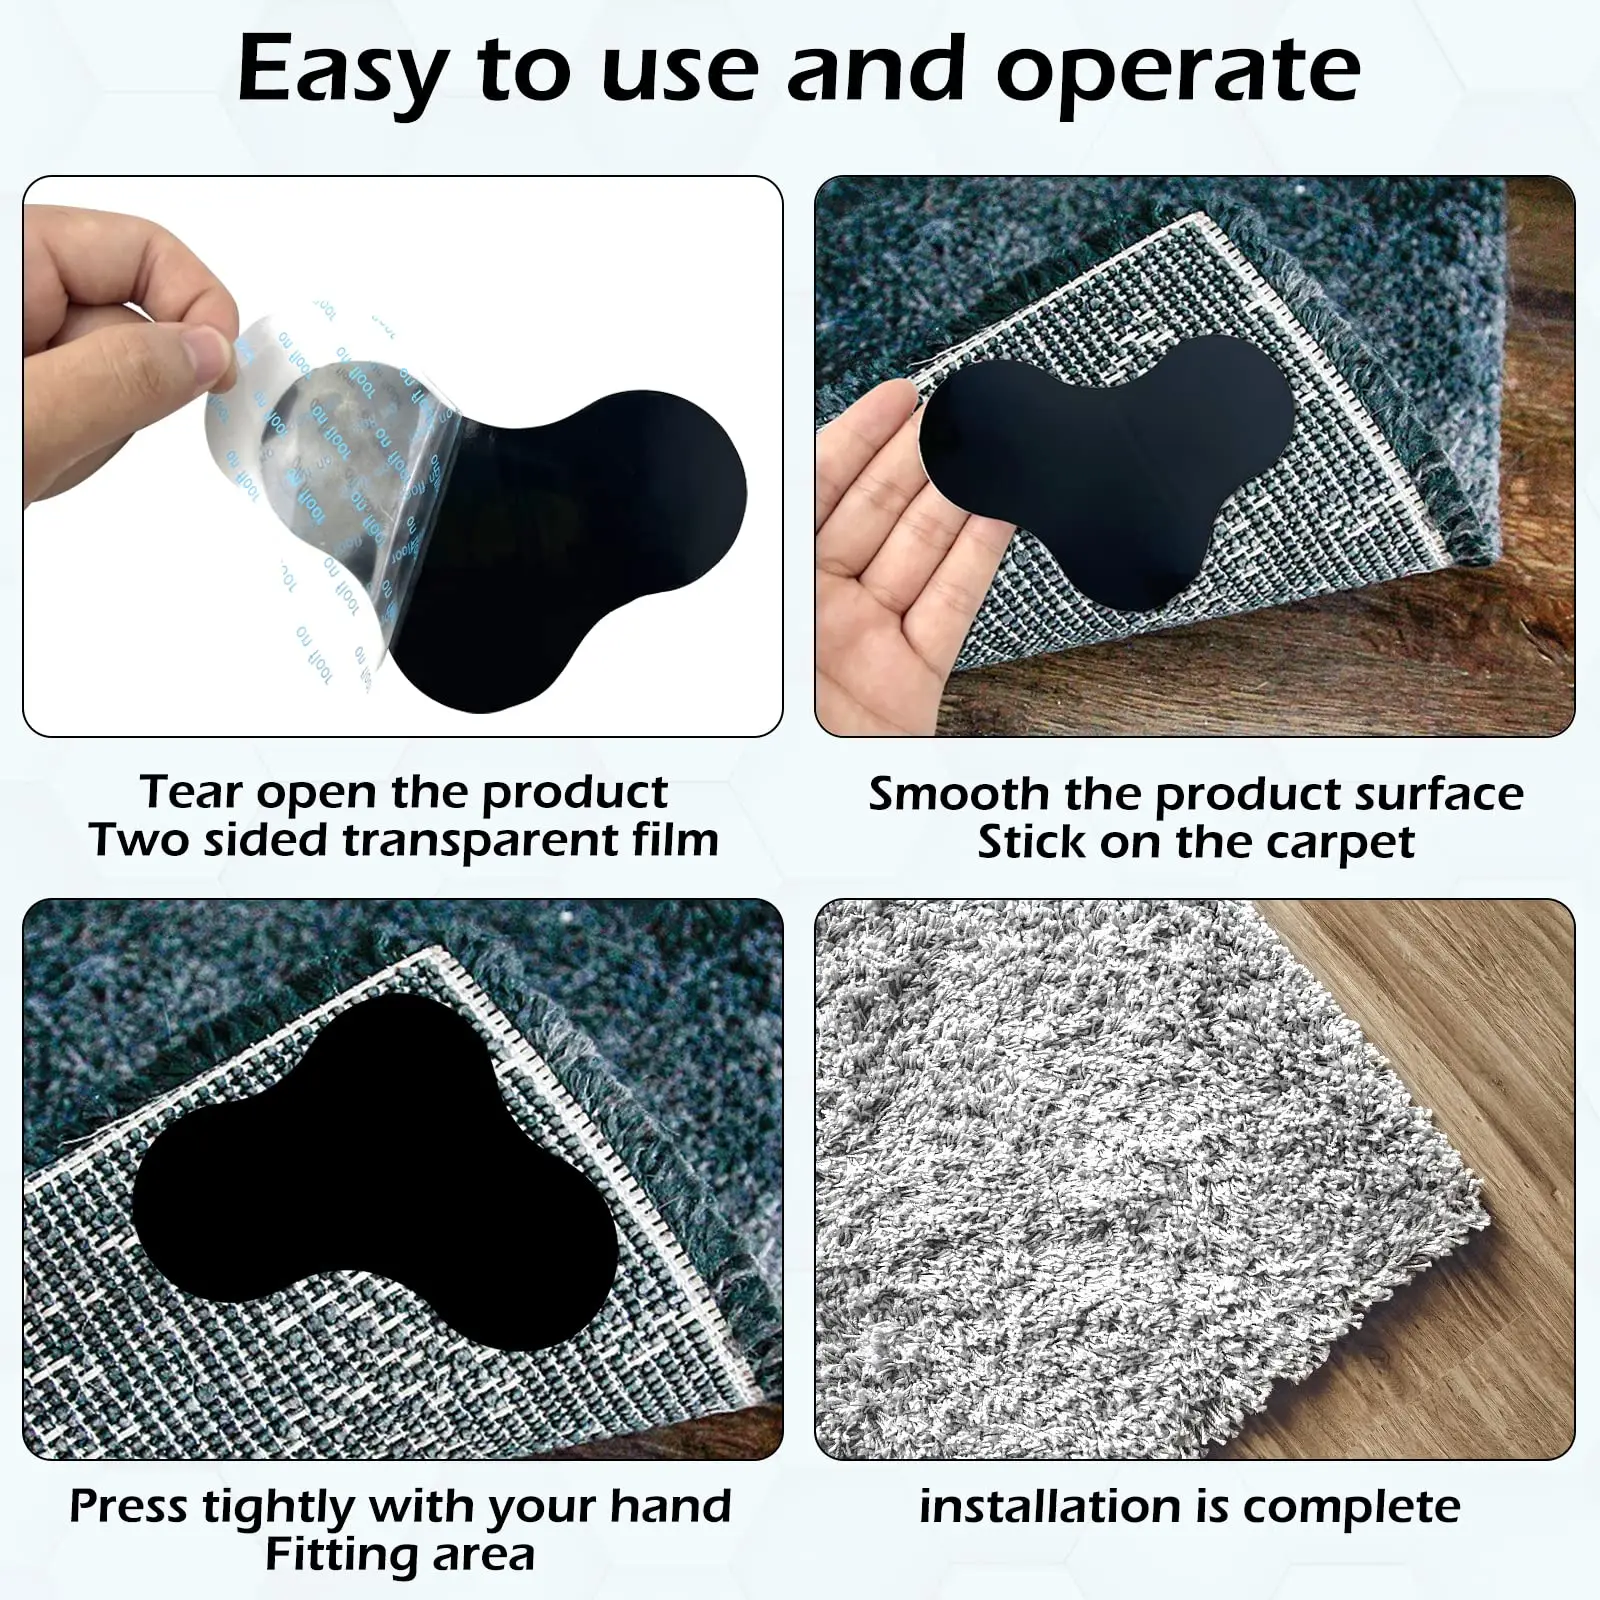 https://ae01.alicdn.com/kf/S9e2c51c4fba64c0f9c1ab8b001b5a429p/4-8Pcs-Non-Slip-Rug-Pads-Double-Sided-Rug-Stoppers-to-Prevent-Sliding-Stickers-Flat-Reusable.jpg